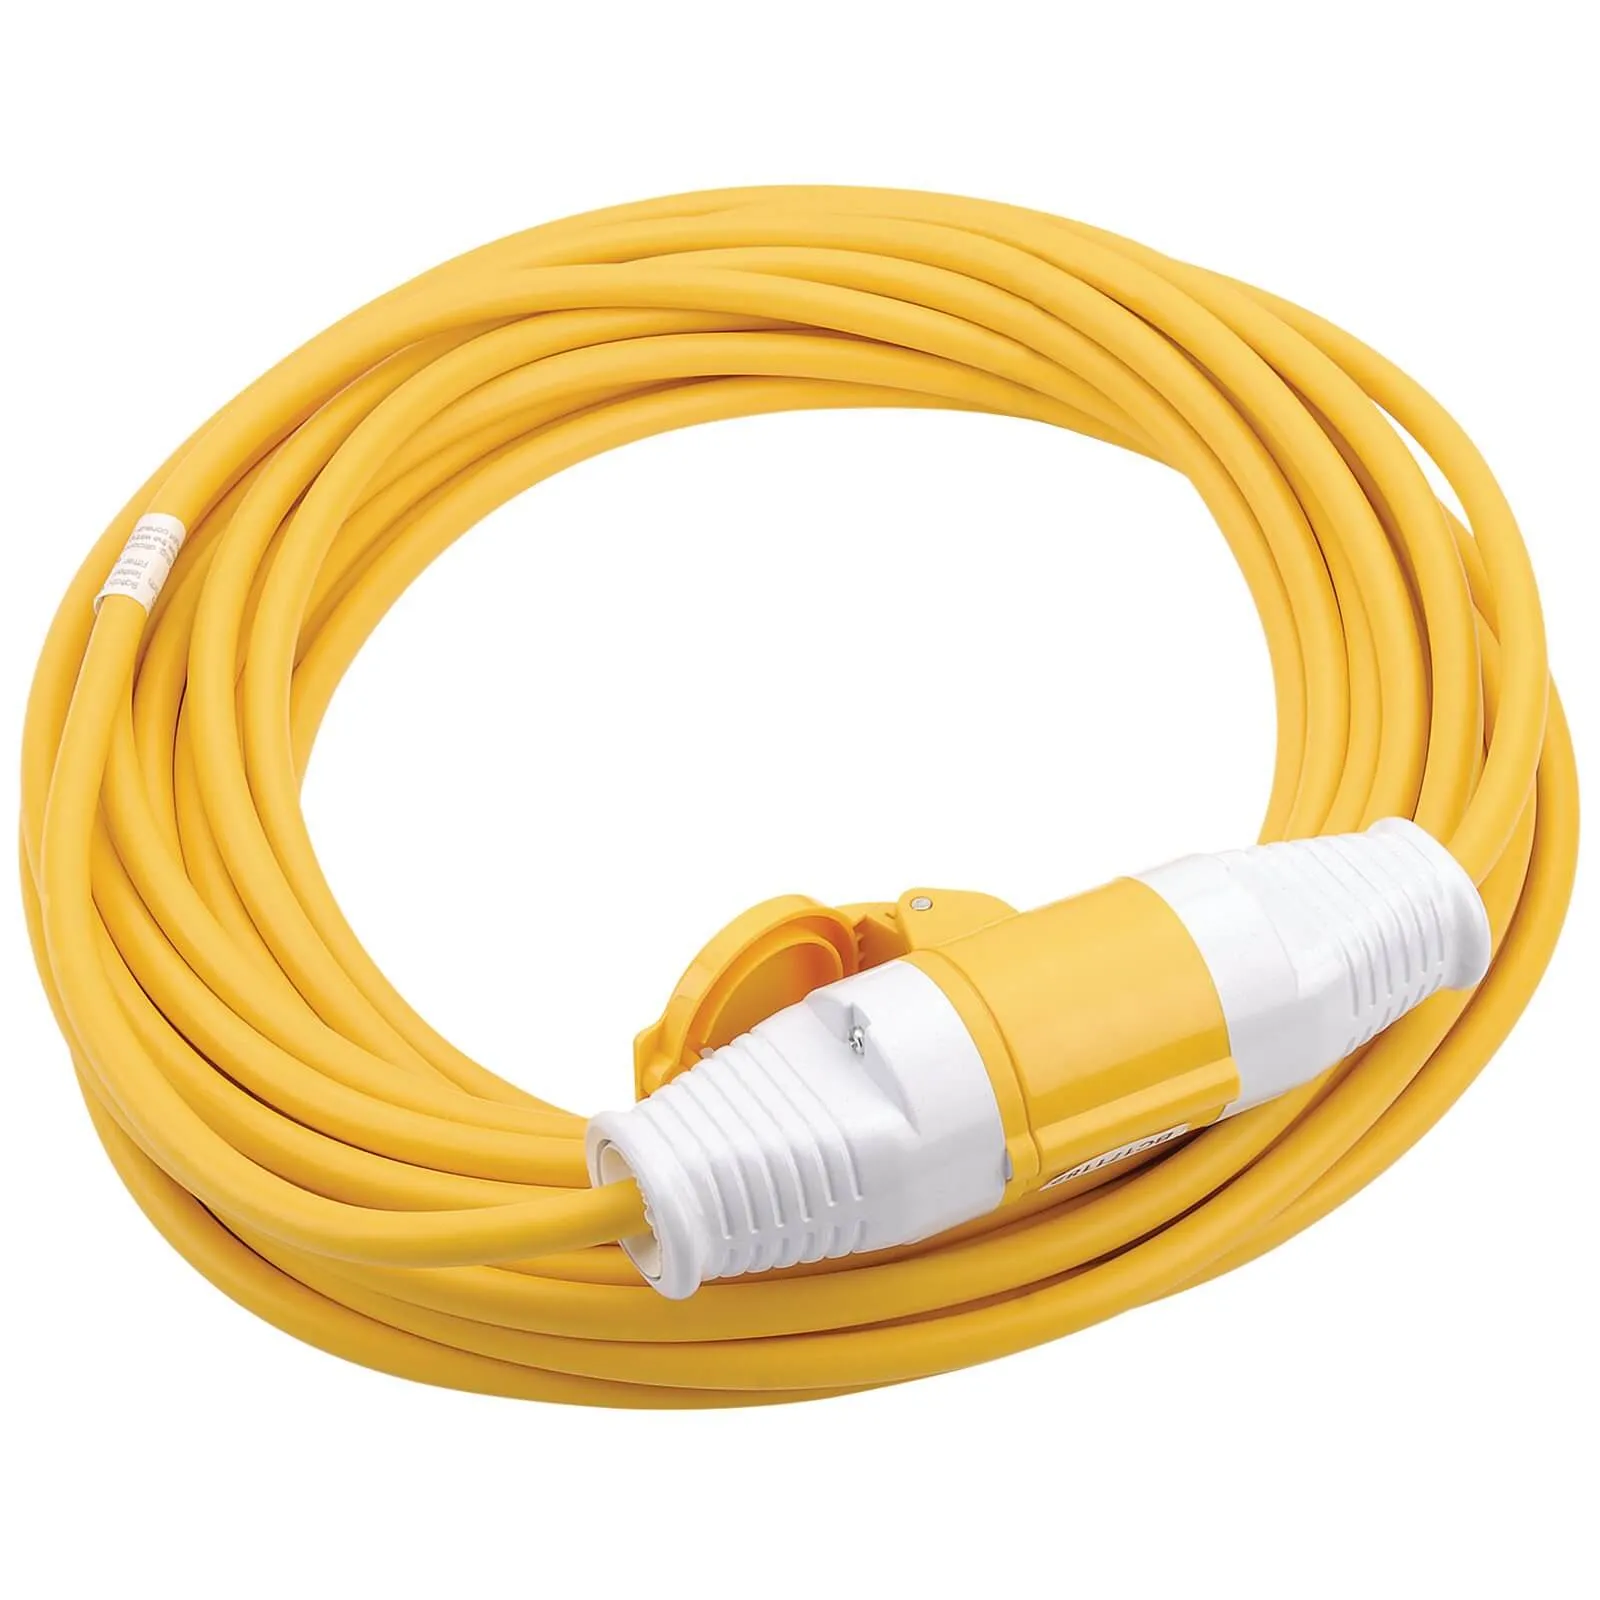 Draper Extension Trailing Lead 32 amp 2.5mm Yellow Cable 110v - 14m